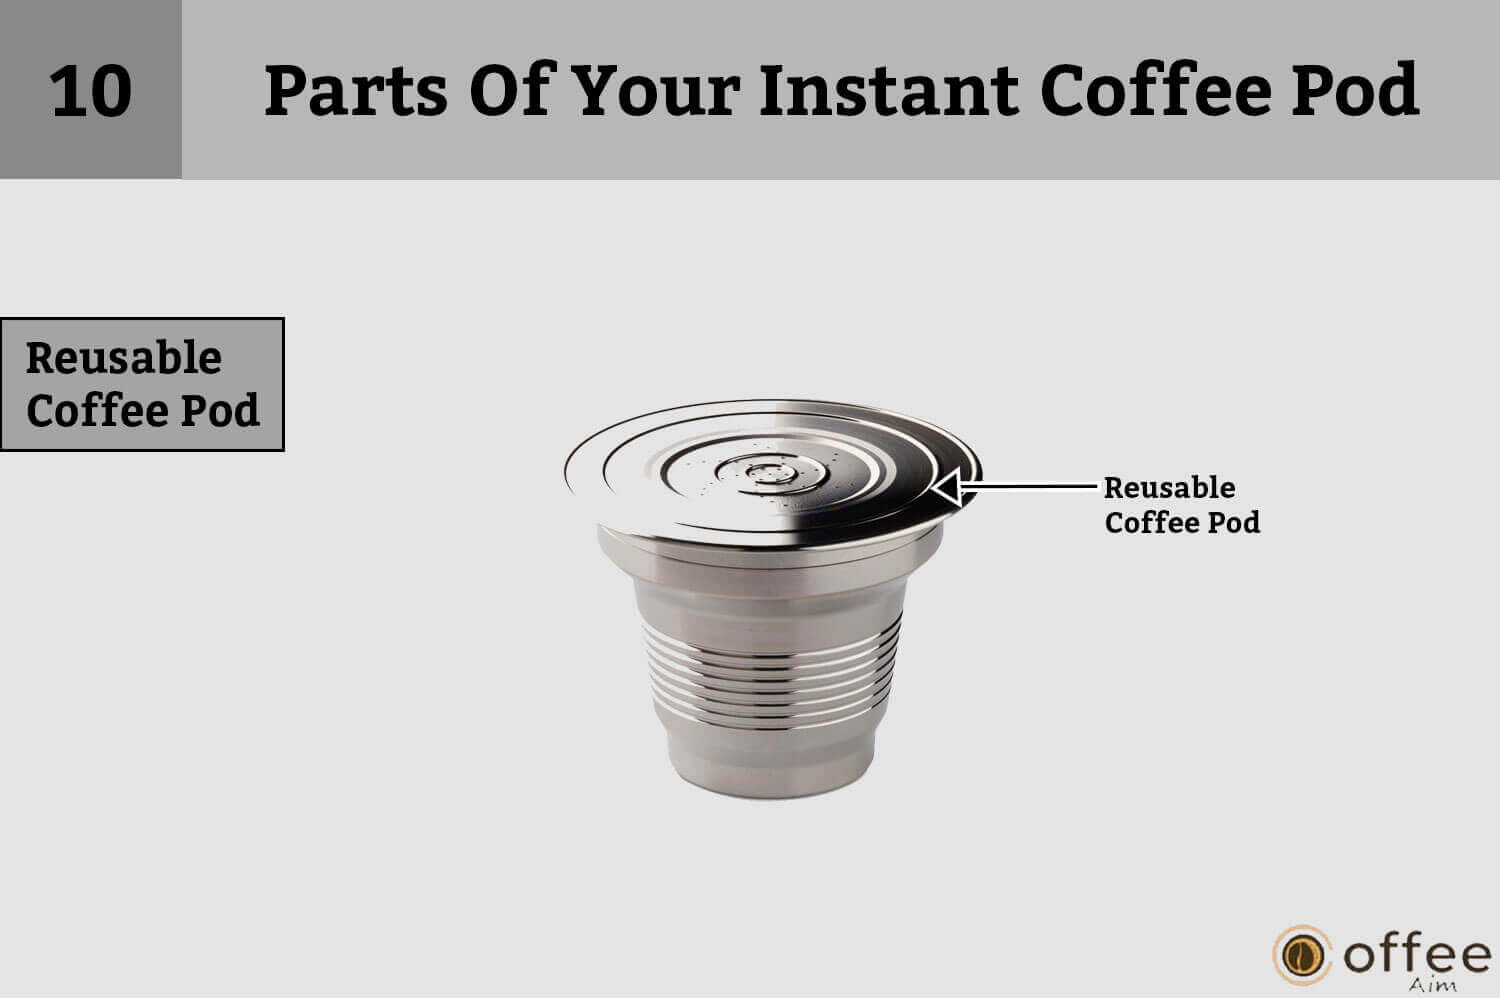 This image showcases the "Reusable Coffee Pod" as part of our article on "Parts Of Your Instant Coffee Pod: How to Connect Nespresso Vertuo Creatista Machine."